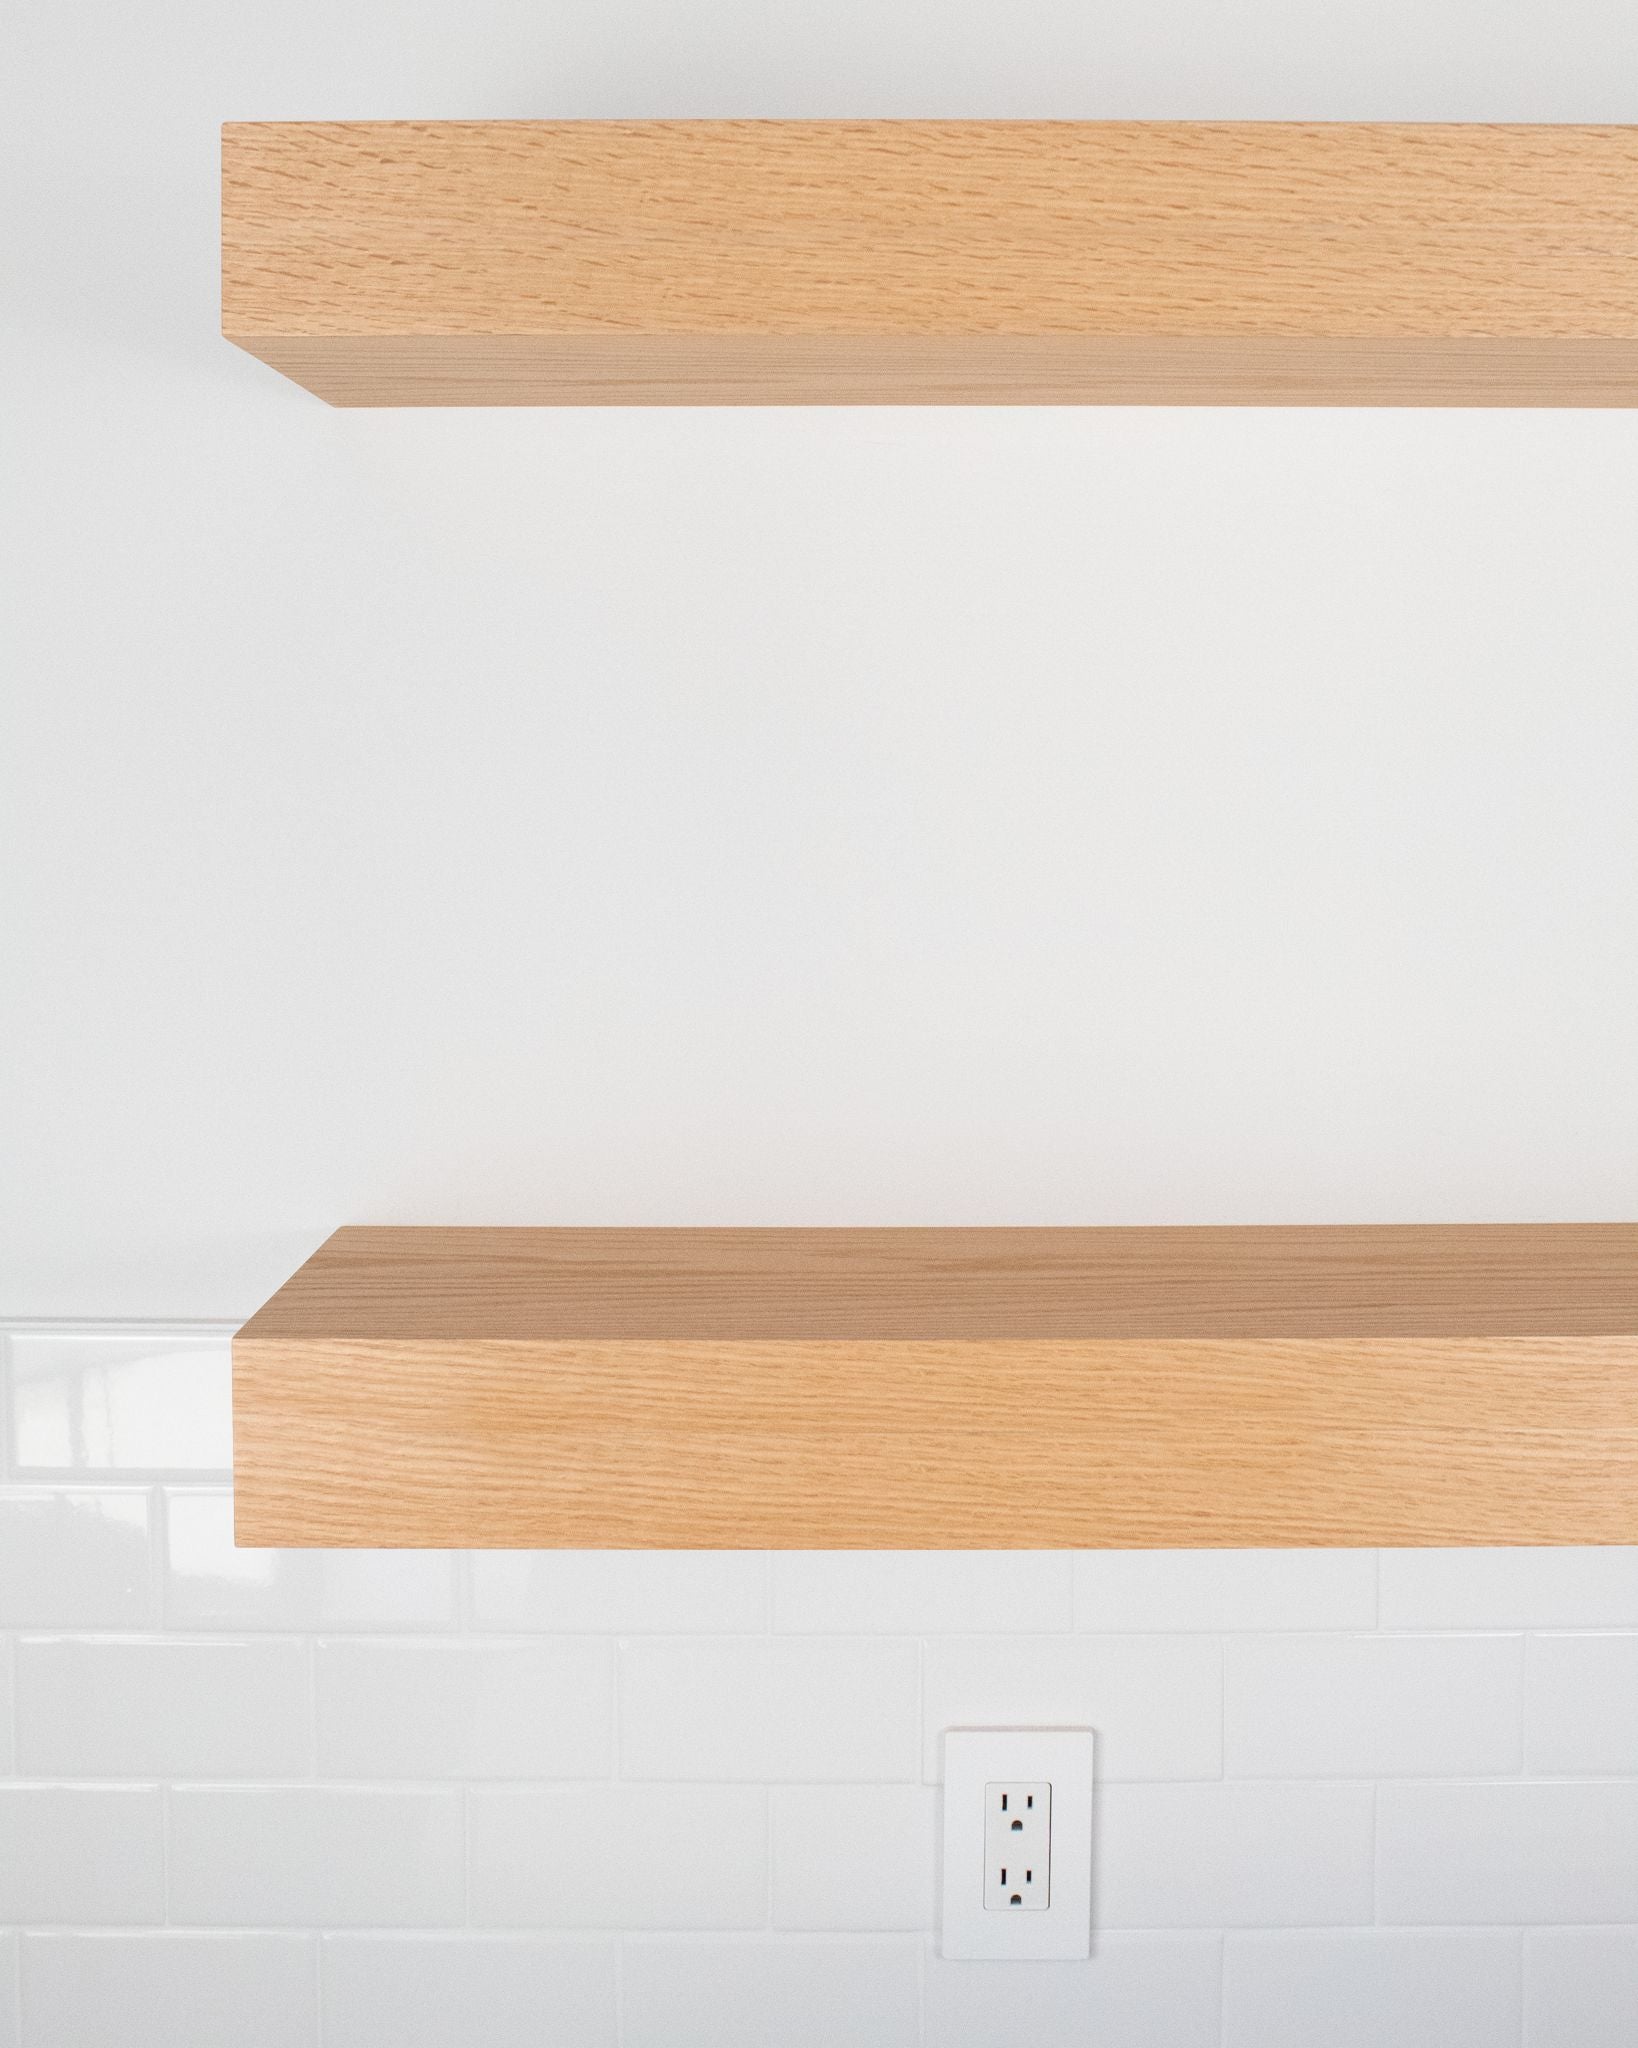 Red Oak Floating Shelves 2-4" thick